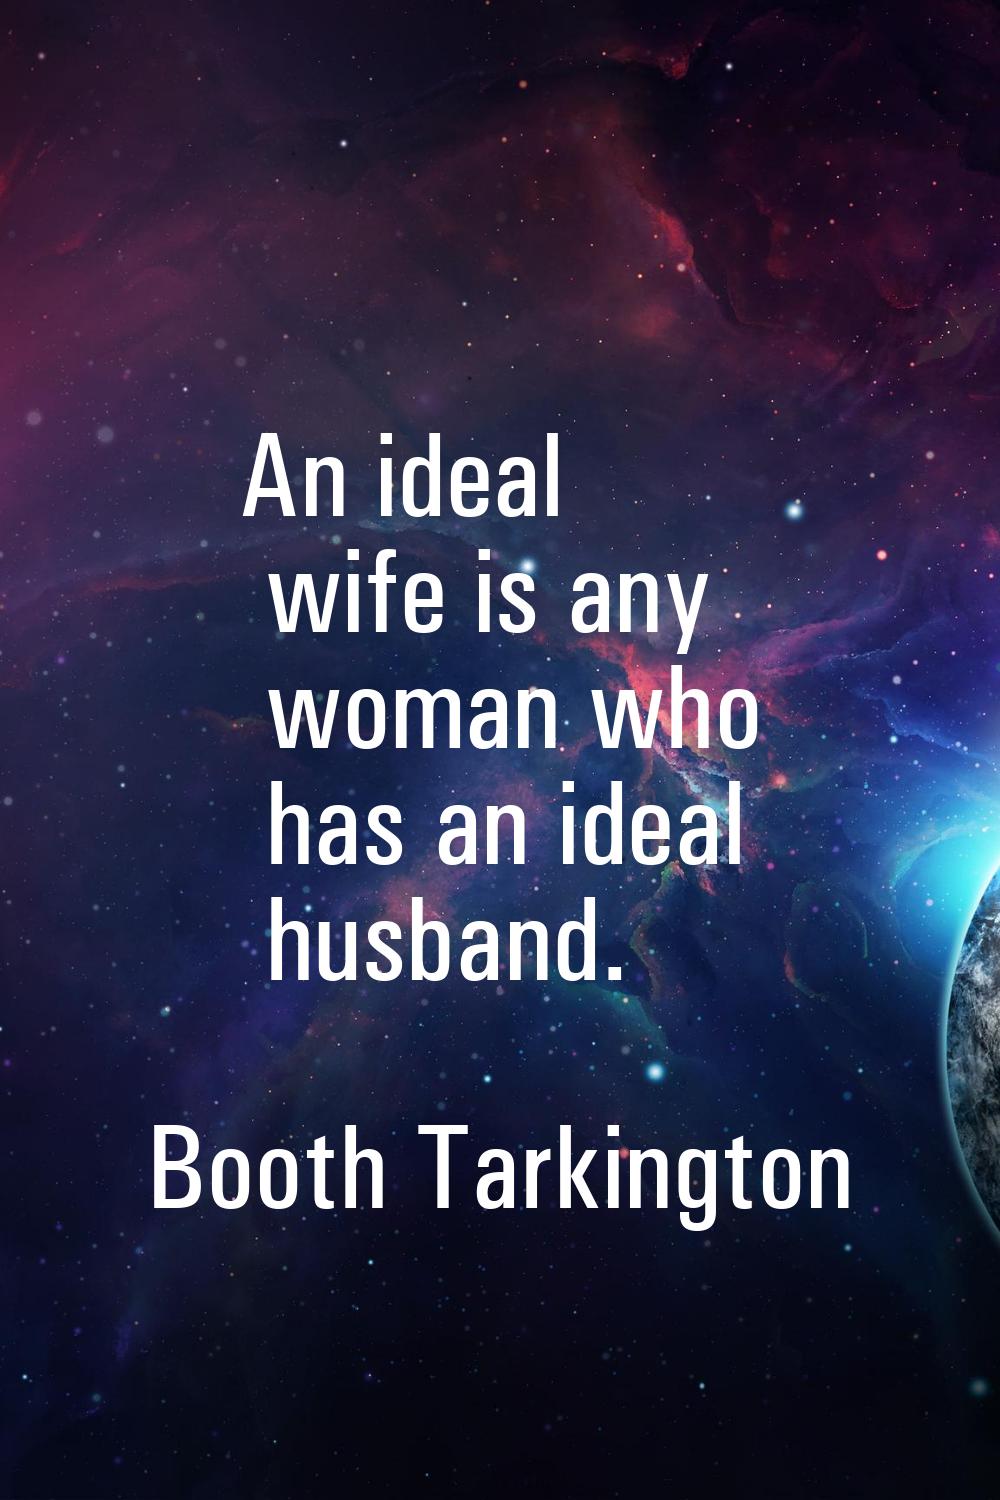 An ideal wife is any woman who has an ideal husband.